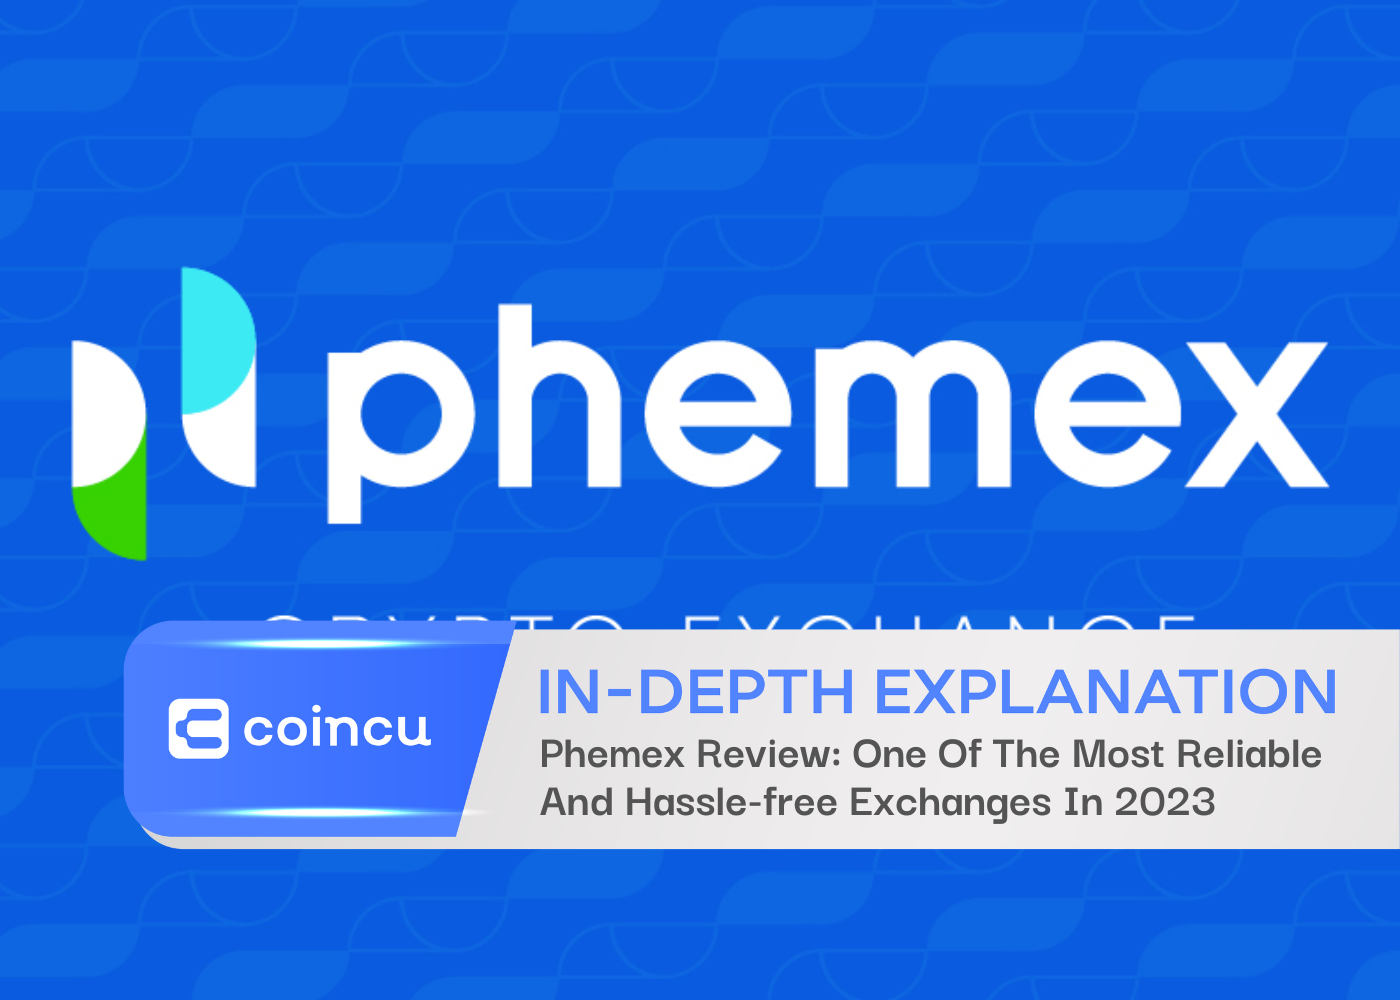 Phemex Review: One Of The Most Reliable And Hassle-free Exchanges In 2023